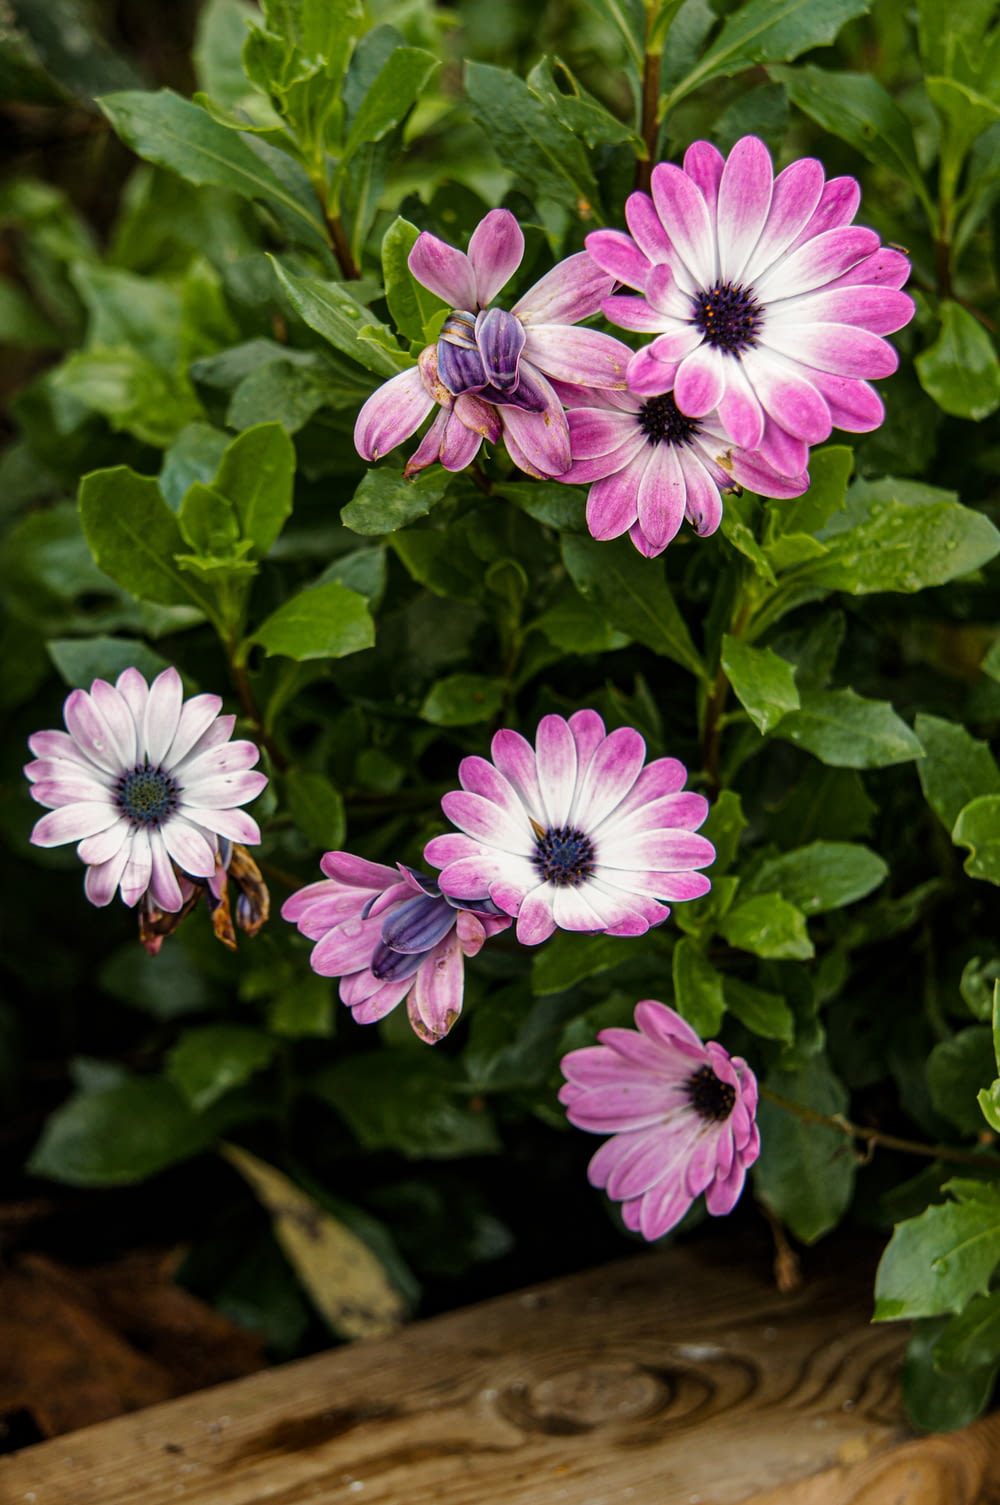 a group of pink and white flowers in a garden